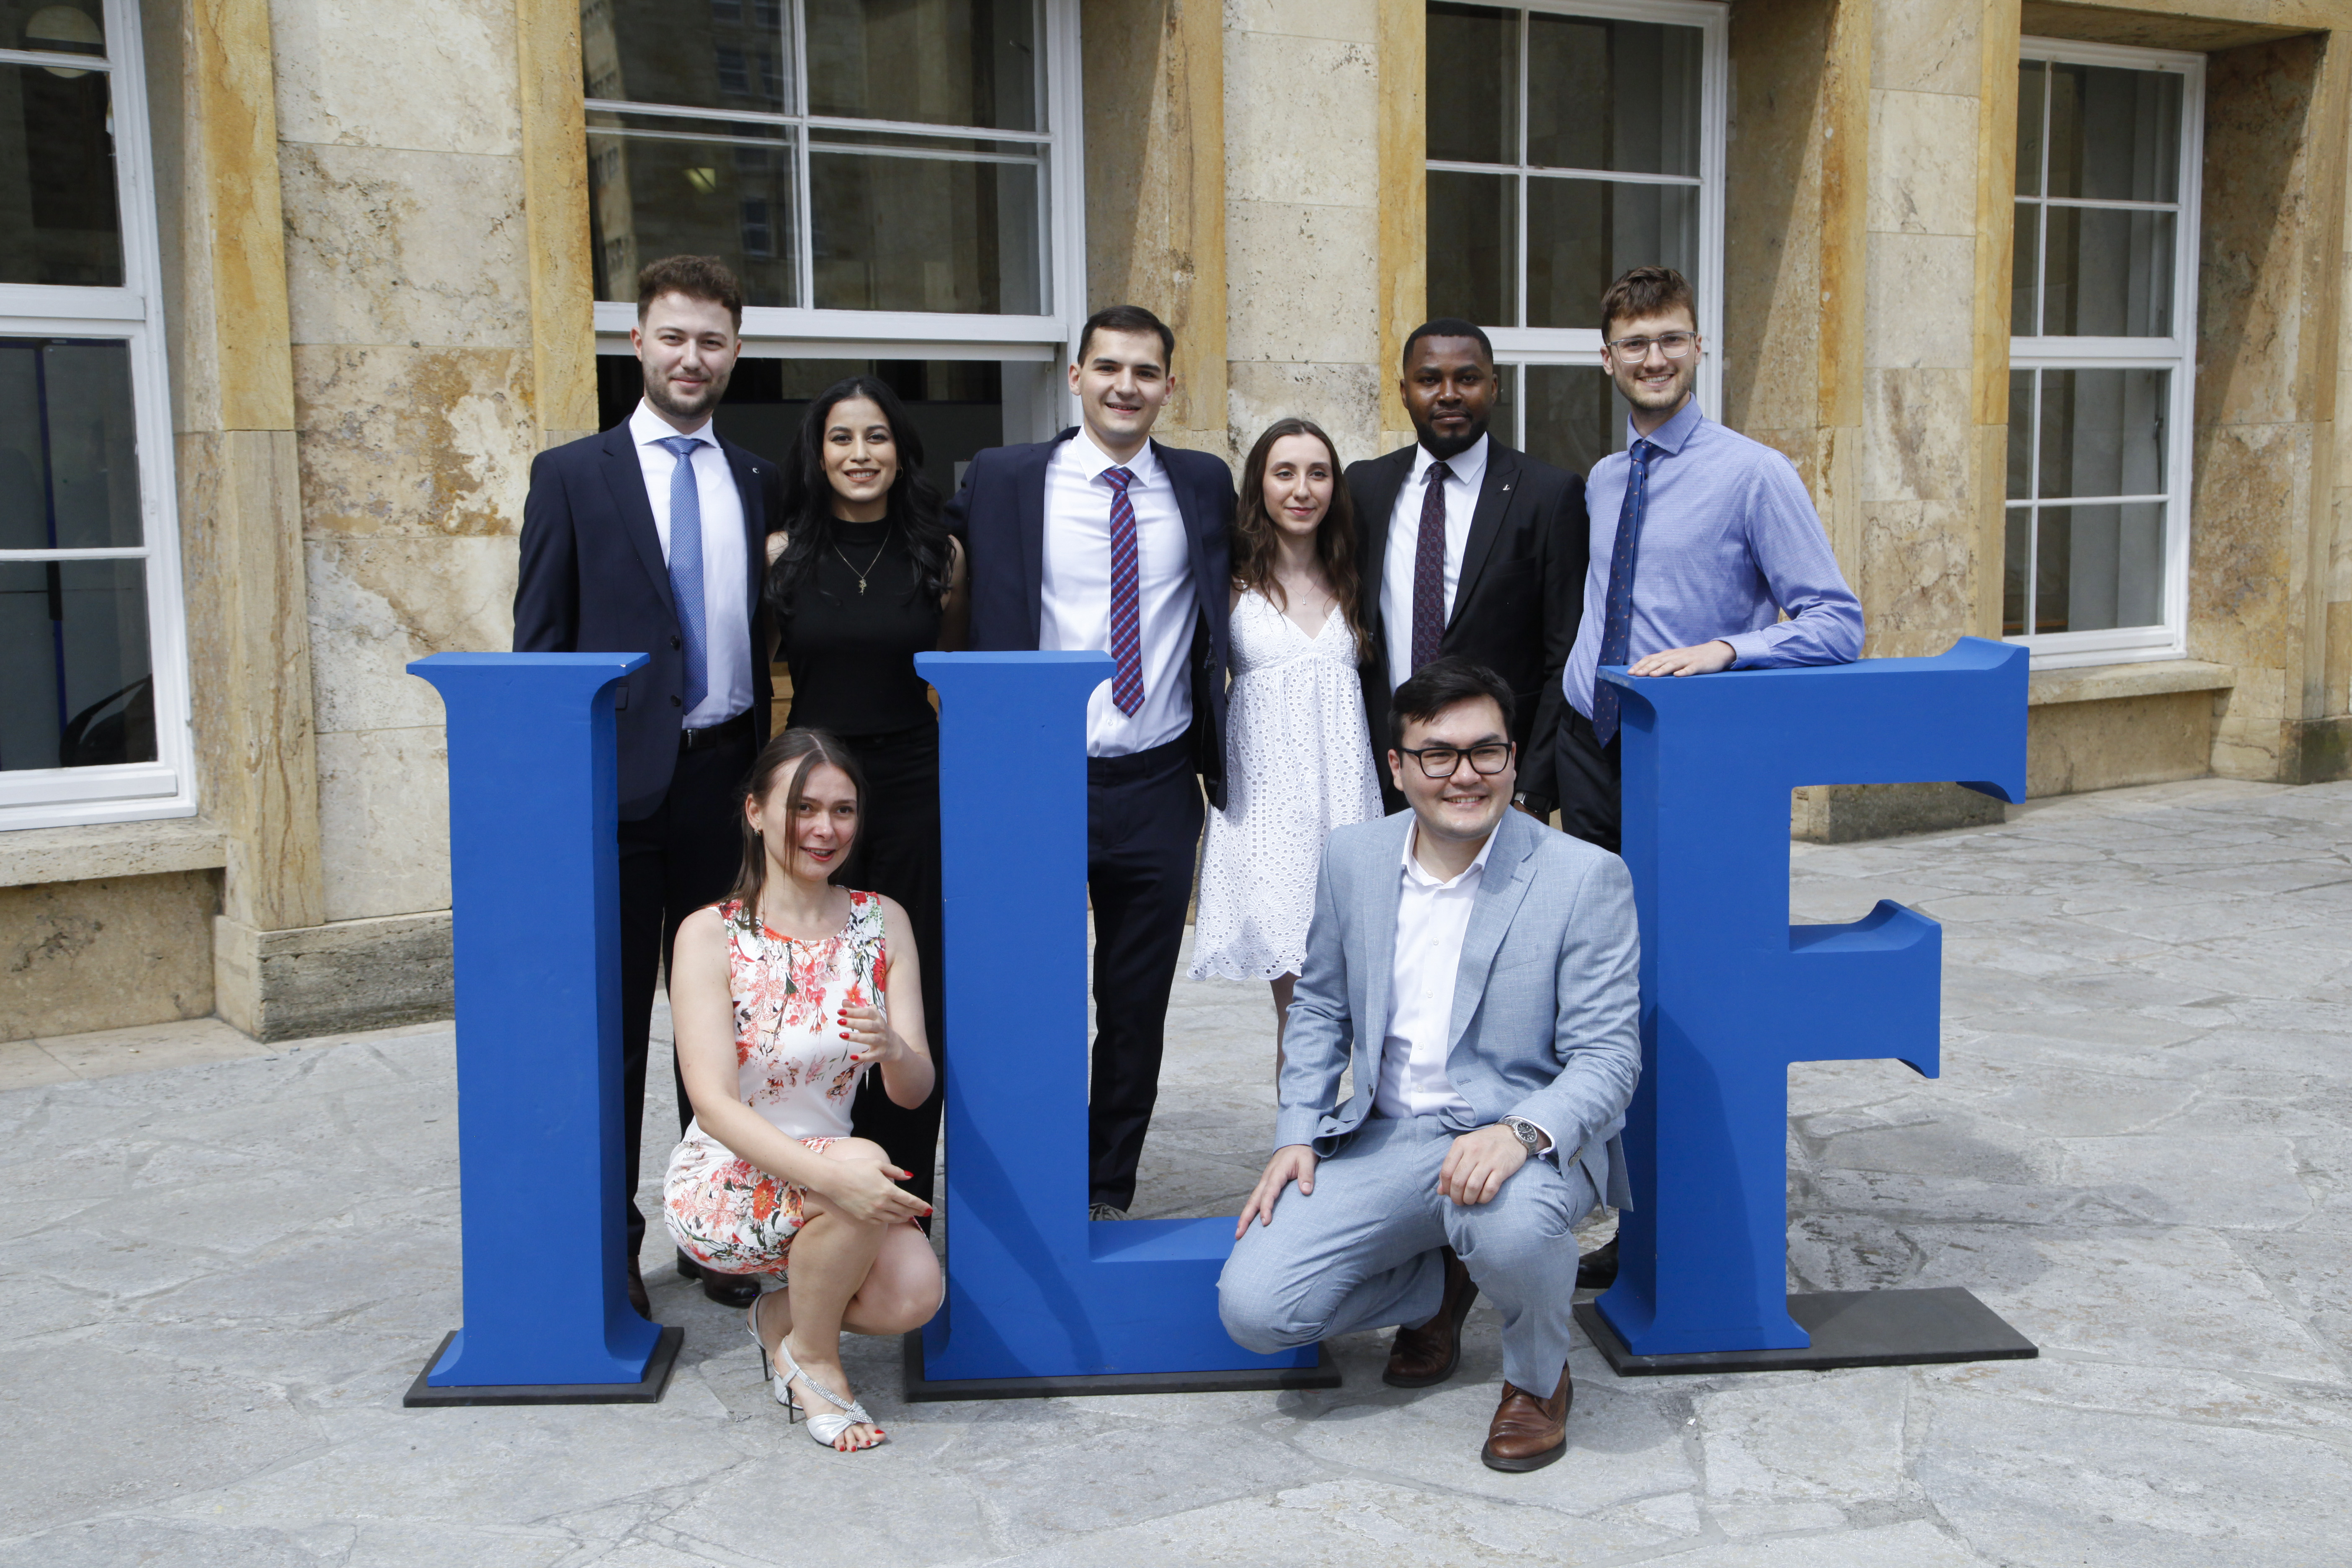 Goethe University’s Institute for Law and Finance: Empowering legal minds with financial acumen